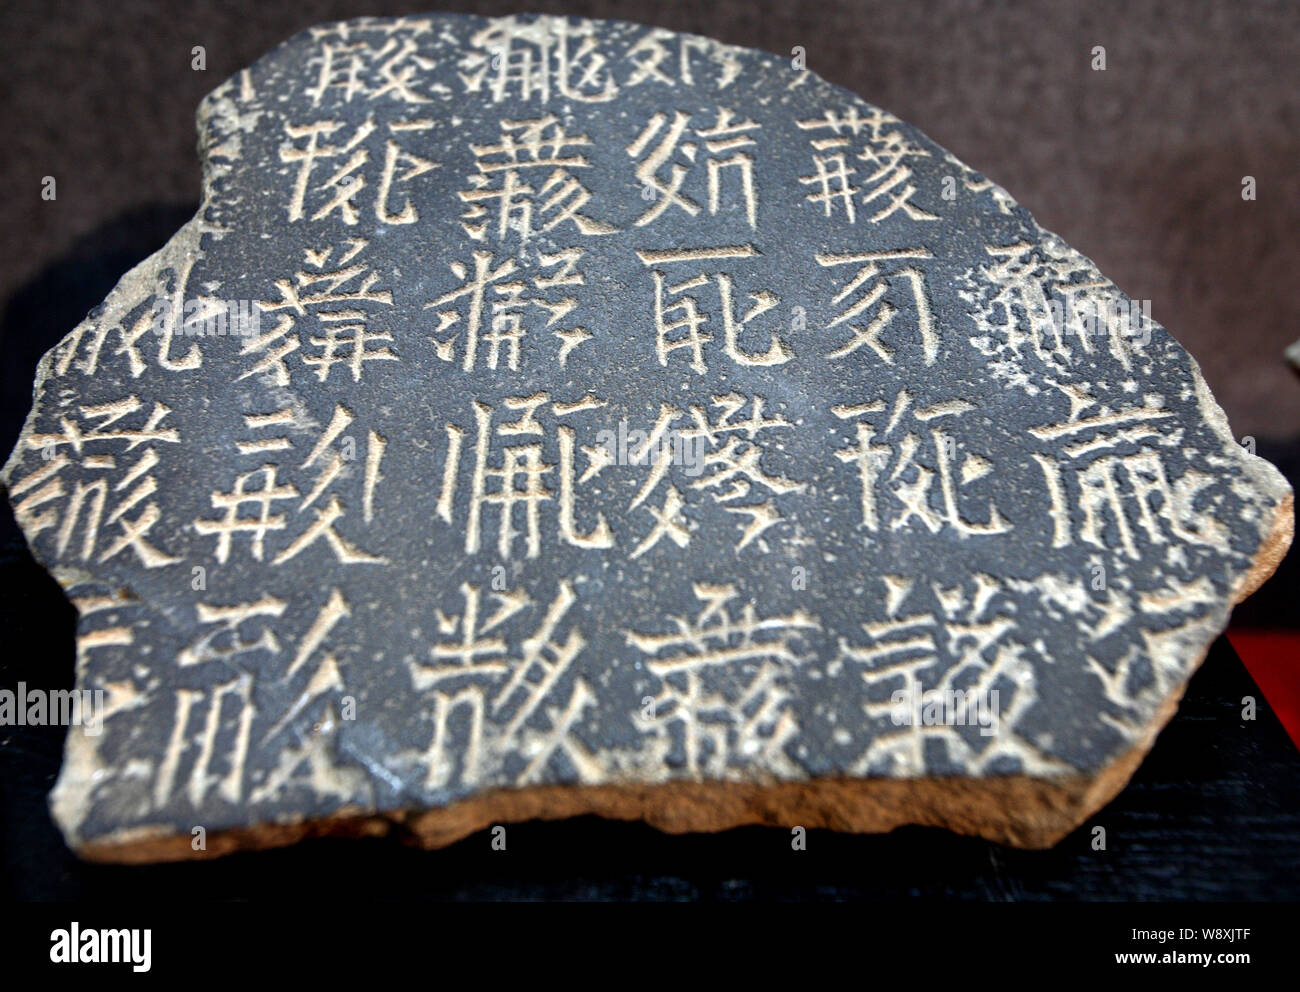 Part of an inscription of Tangut characters is displayed during an exhibition at a Museum in Hangzhou city, east China's Zhejiang province, 28 Septemb Stock Photo